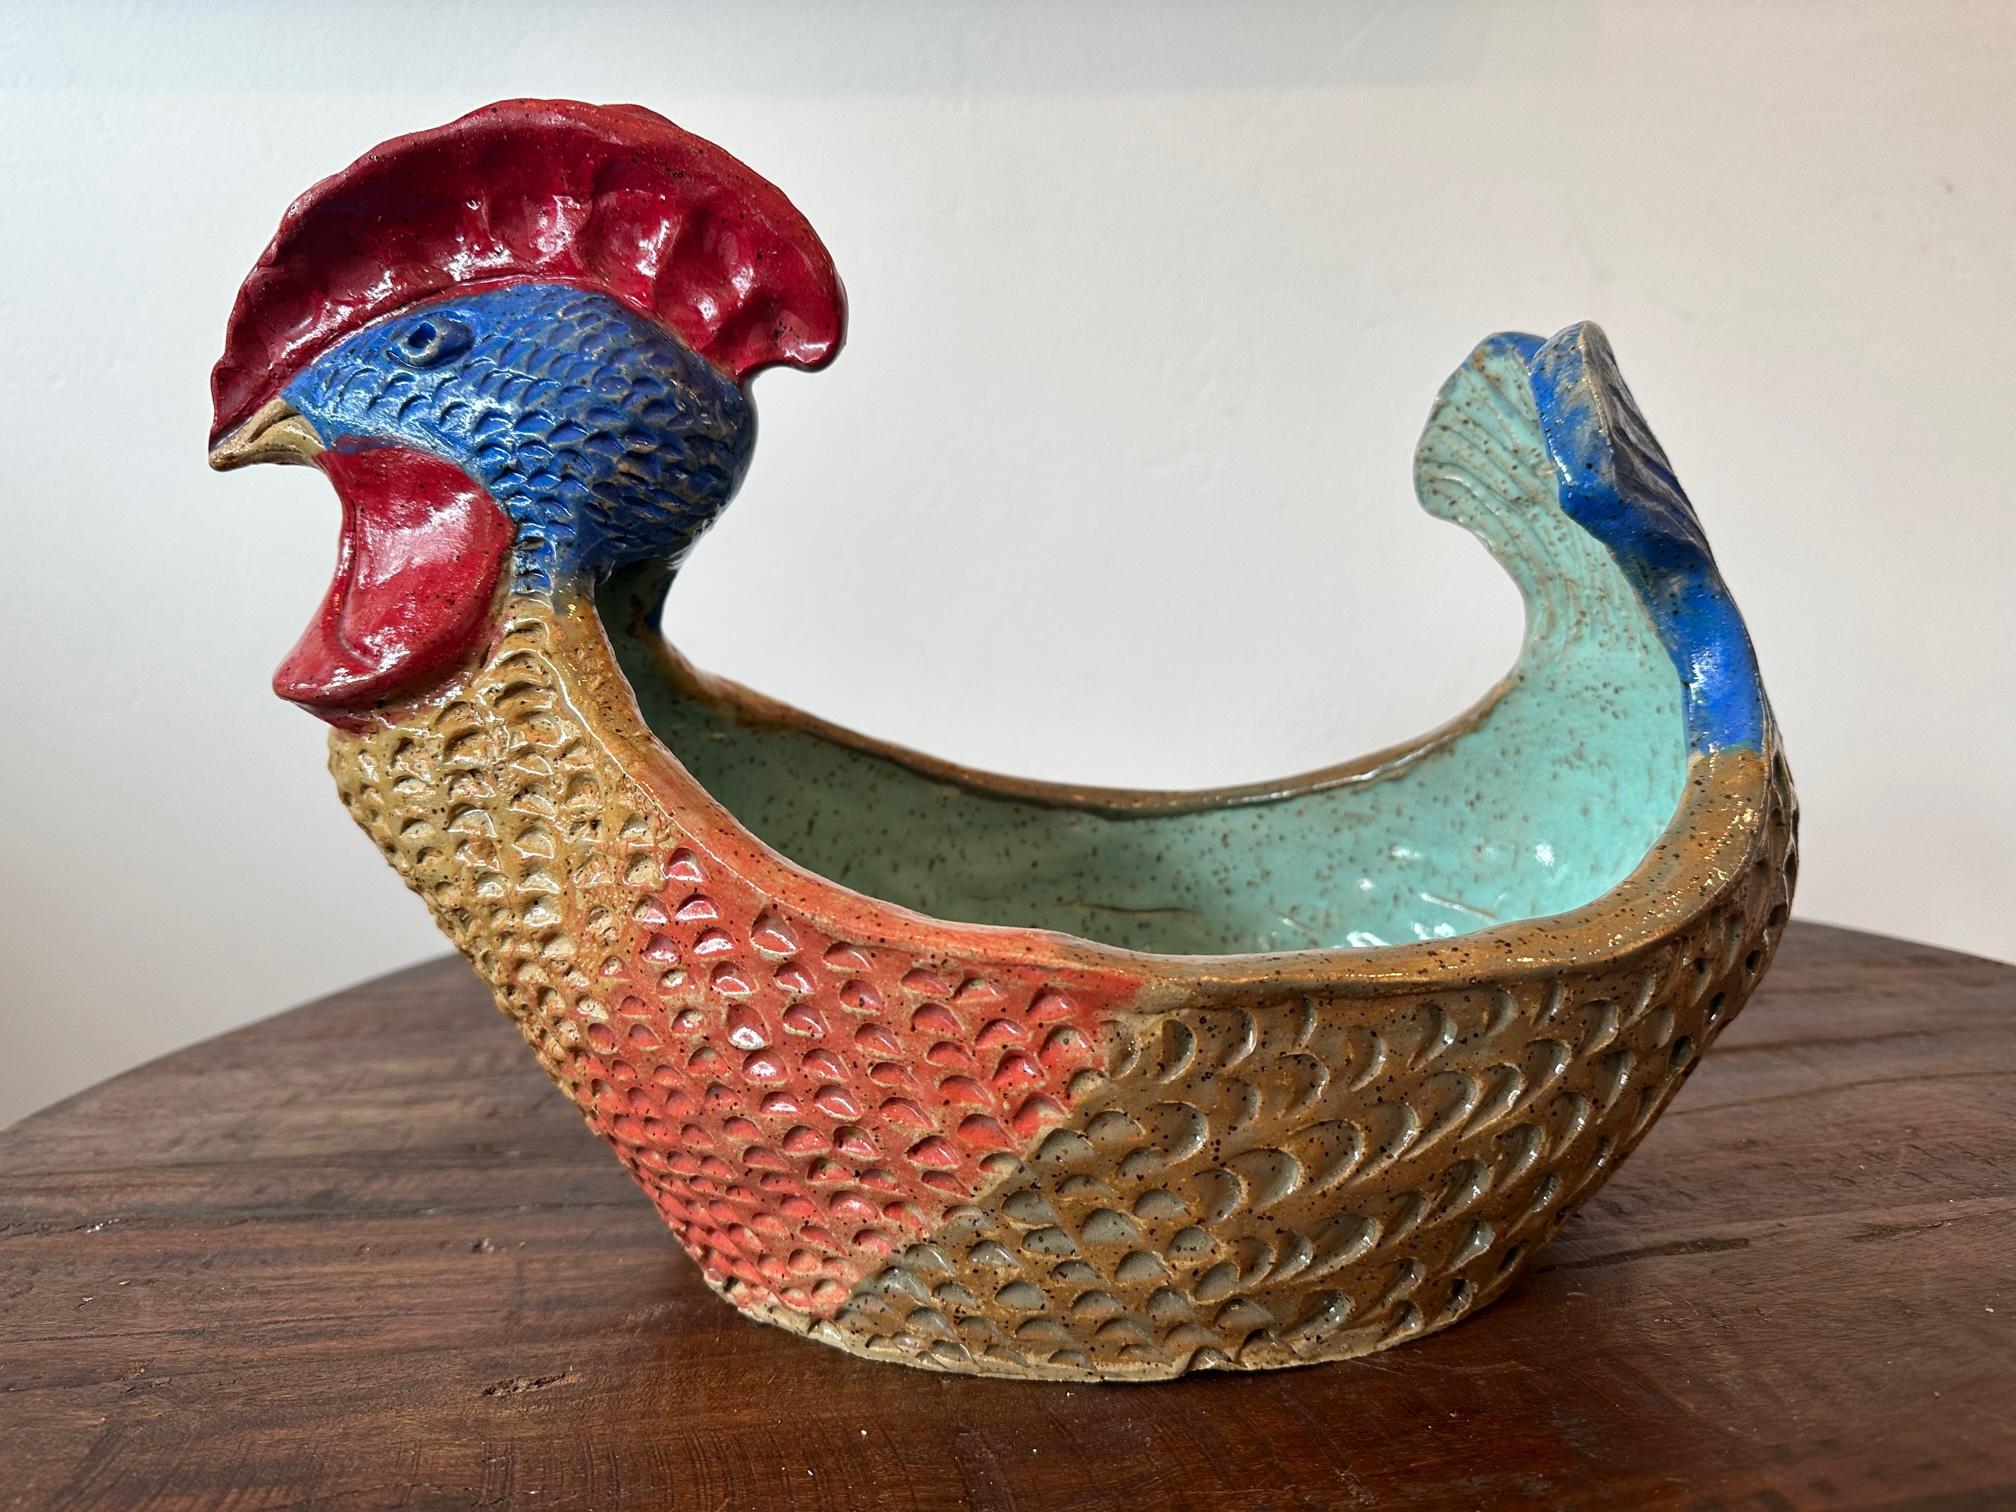 Functional Art Sculpture one of a kind by Marc Zimmerman

Chicken Bowl - Rooster - Clay Sculpture

This whimsical clay sculpture, created by the talented artist Marc Zimmerman, stands out as a one-of-a-kind masterpiece. Zimmerman's remarkable Clay